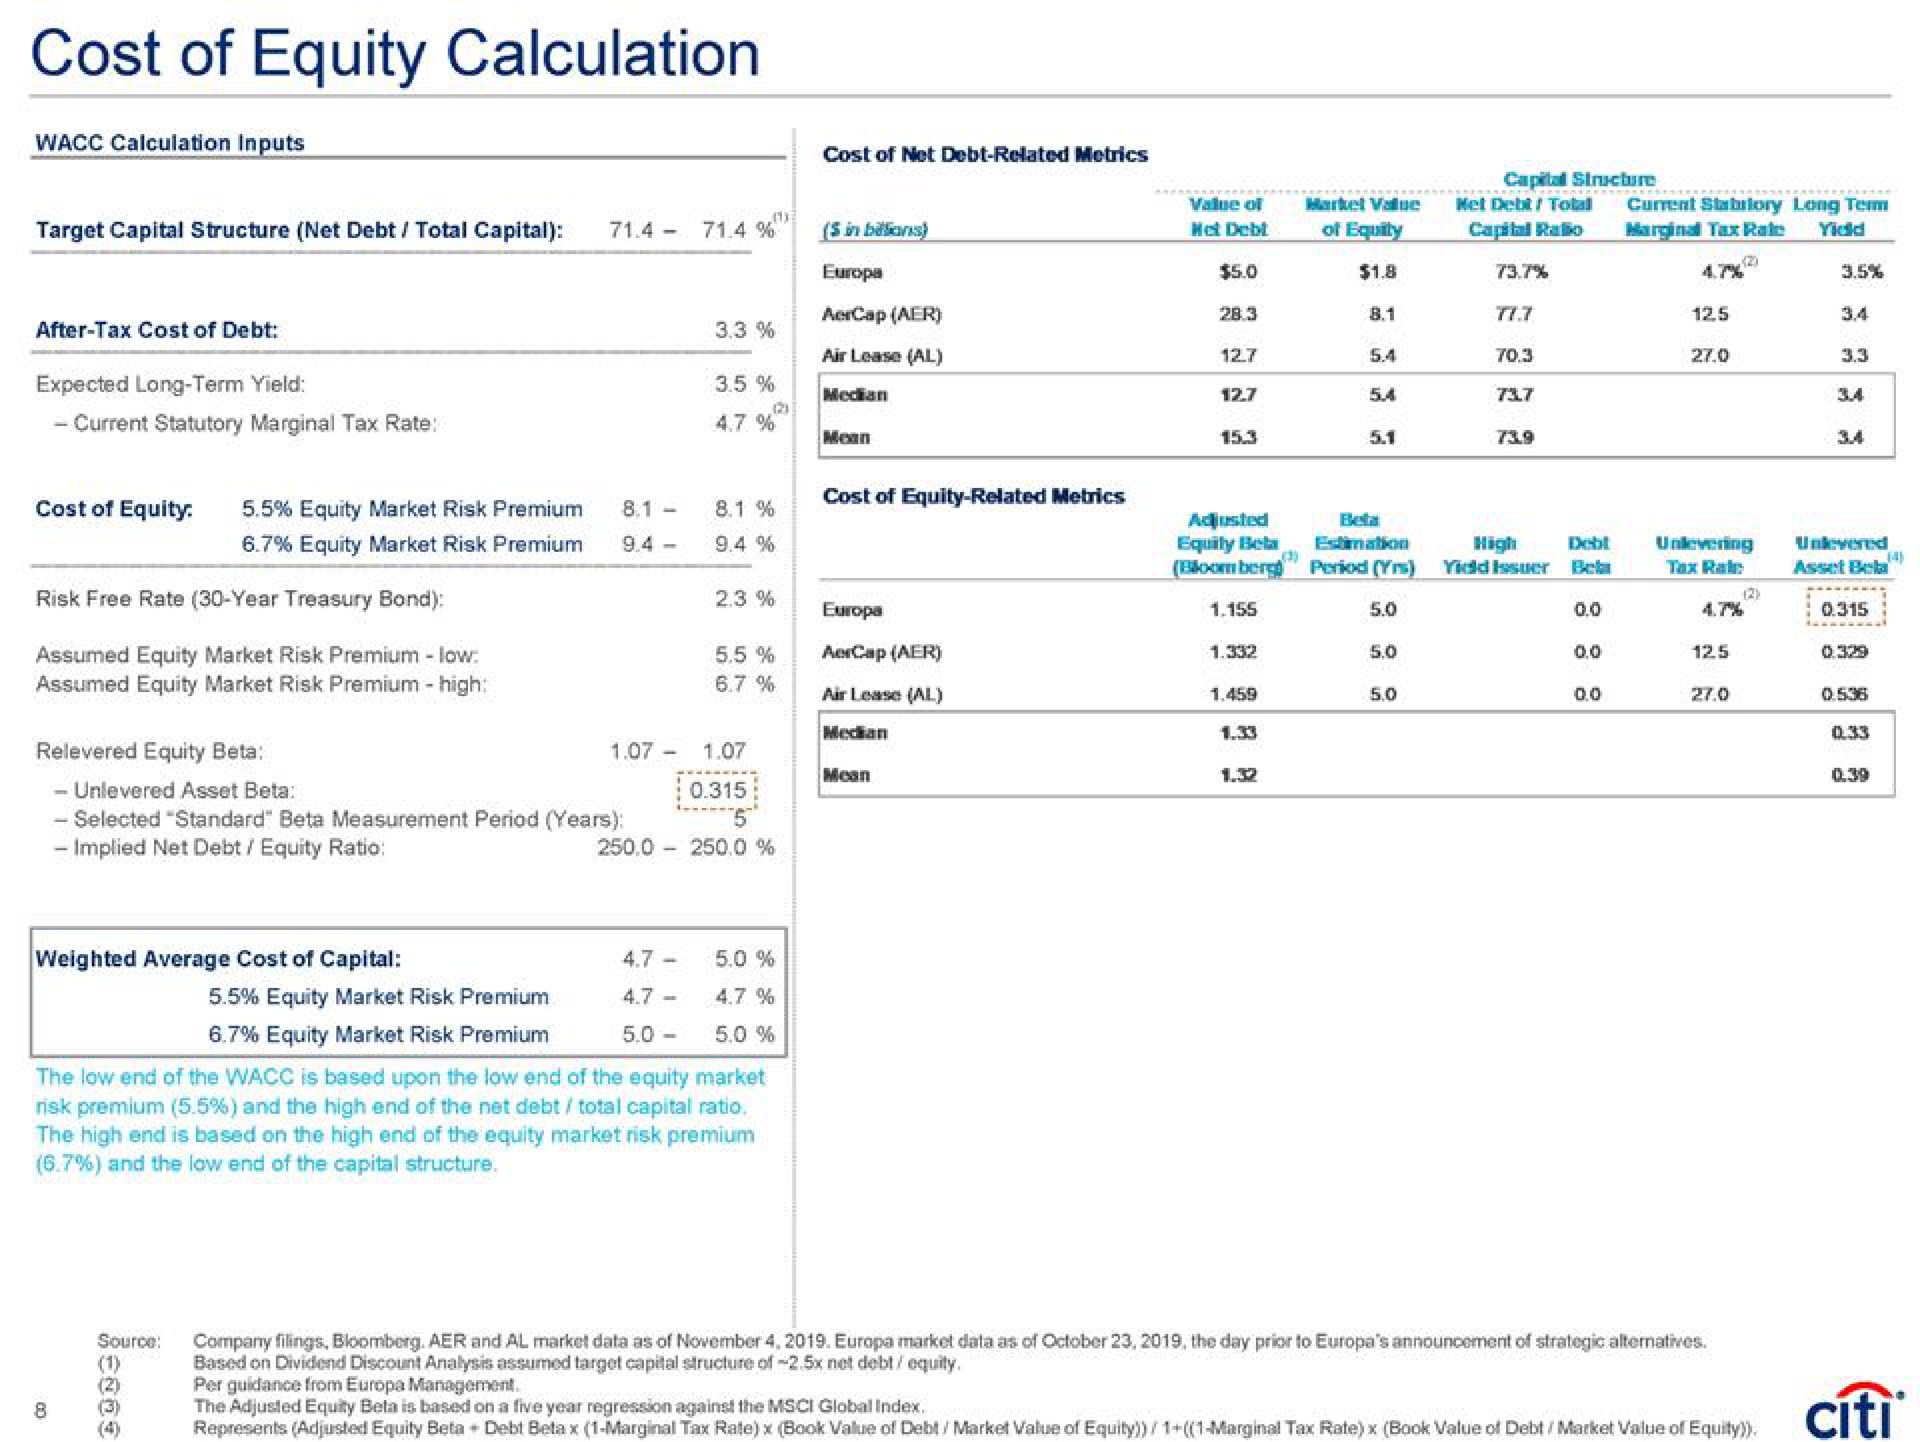 cost of equity calculation calculation inputs cost of net debt related metrics | Citi